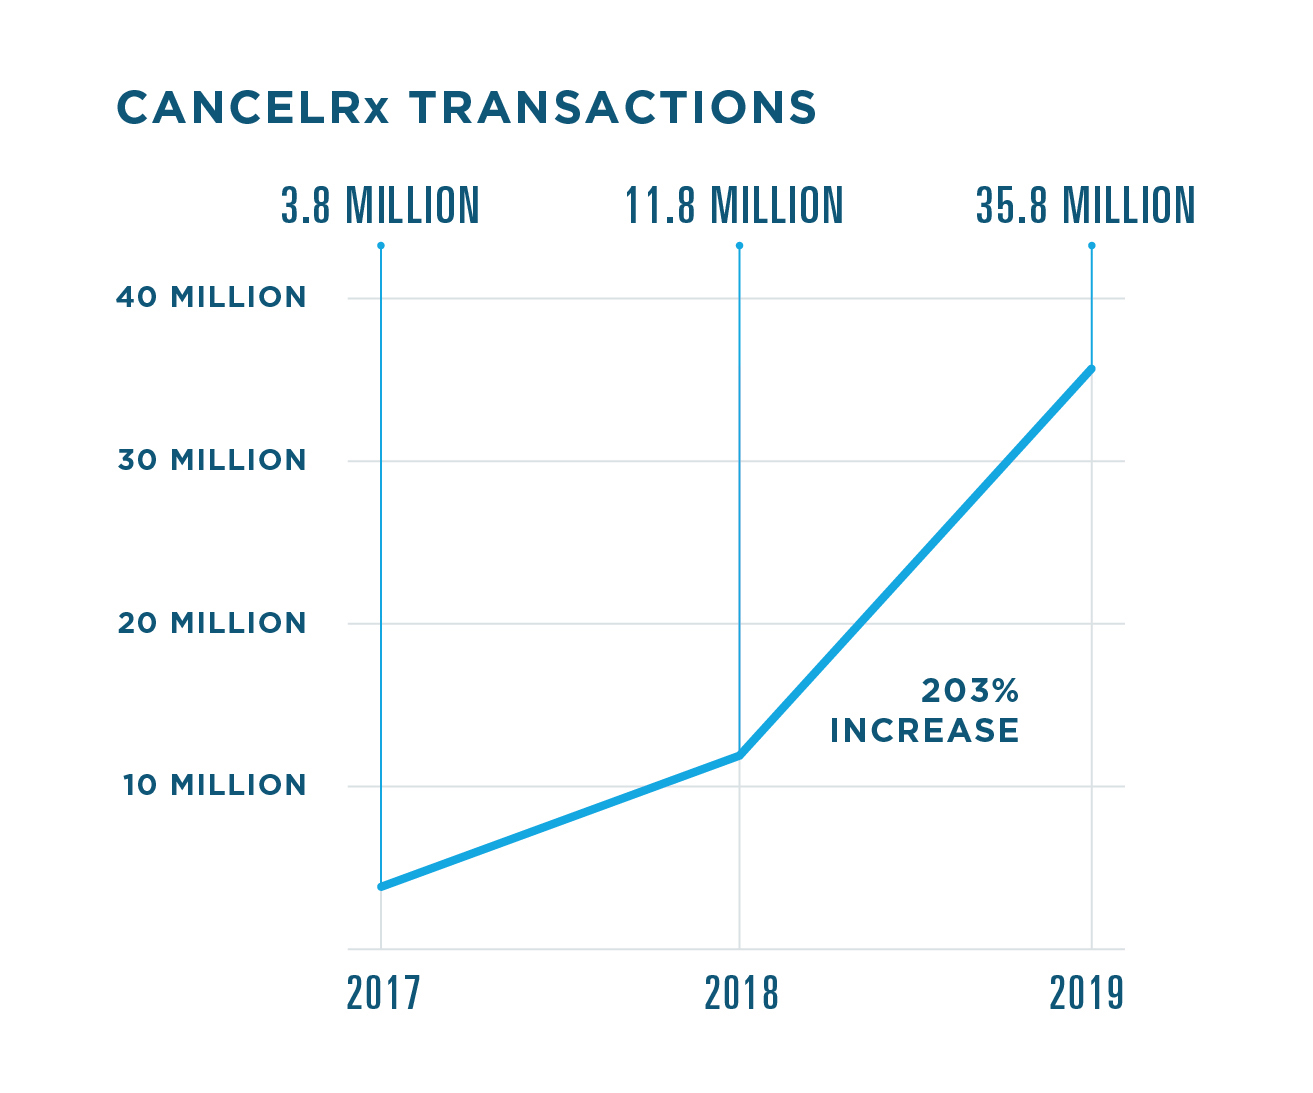 CancelRx transactions increased 203% in 2019, totalling 35.8 million. There were 11.8 million CancelRx transactions in 2018 and 3.8 million in 2017. In 2019, 47% of prescribers were enabled for CancelRx, compared to 29% in 2018 and 13% in 2017.